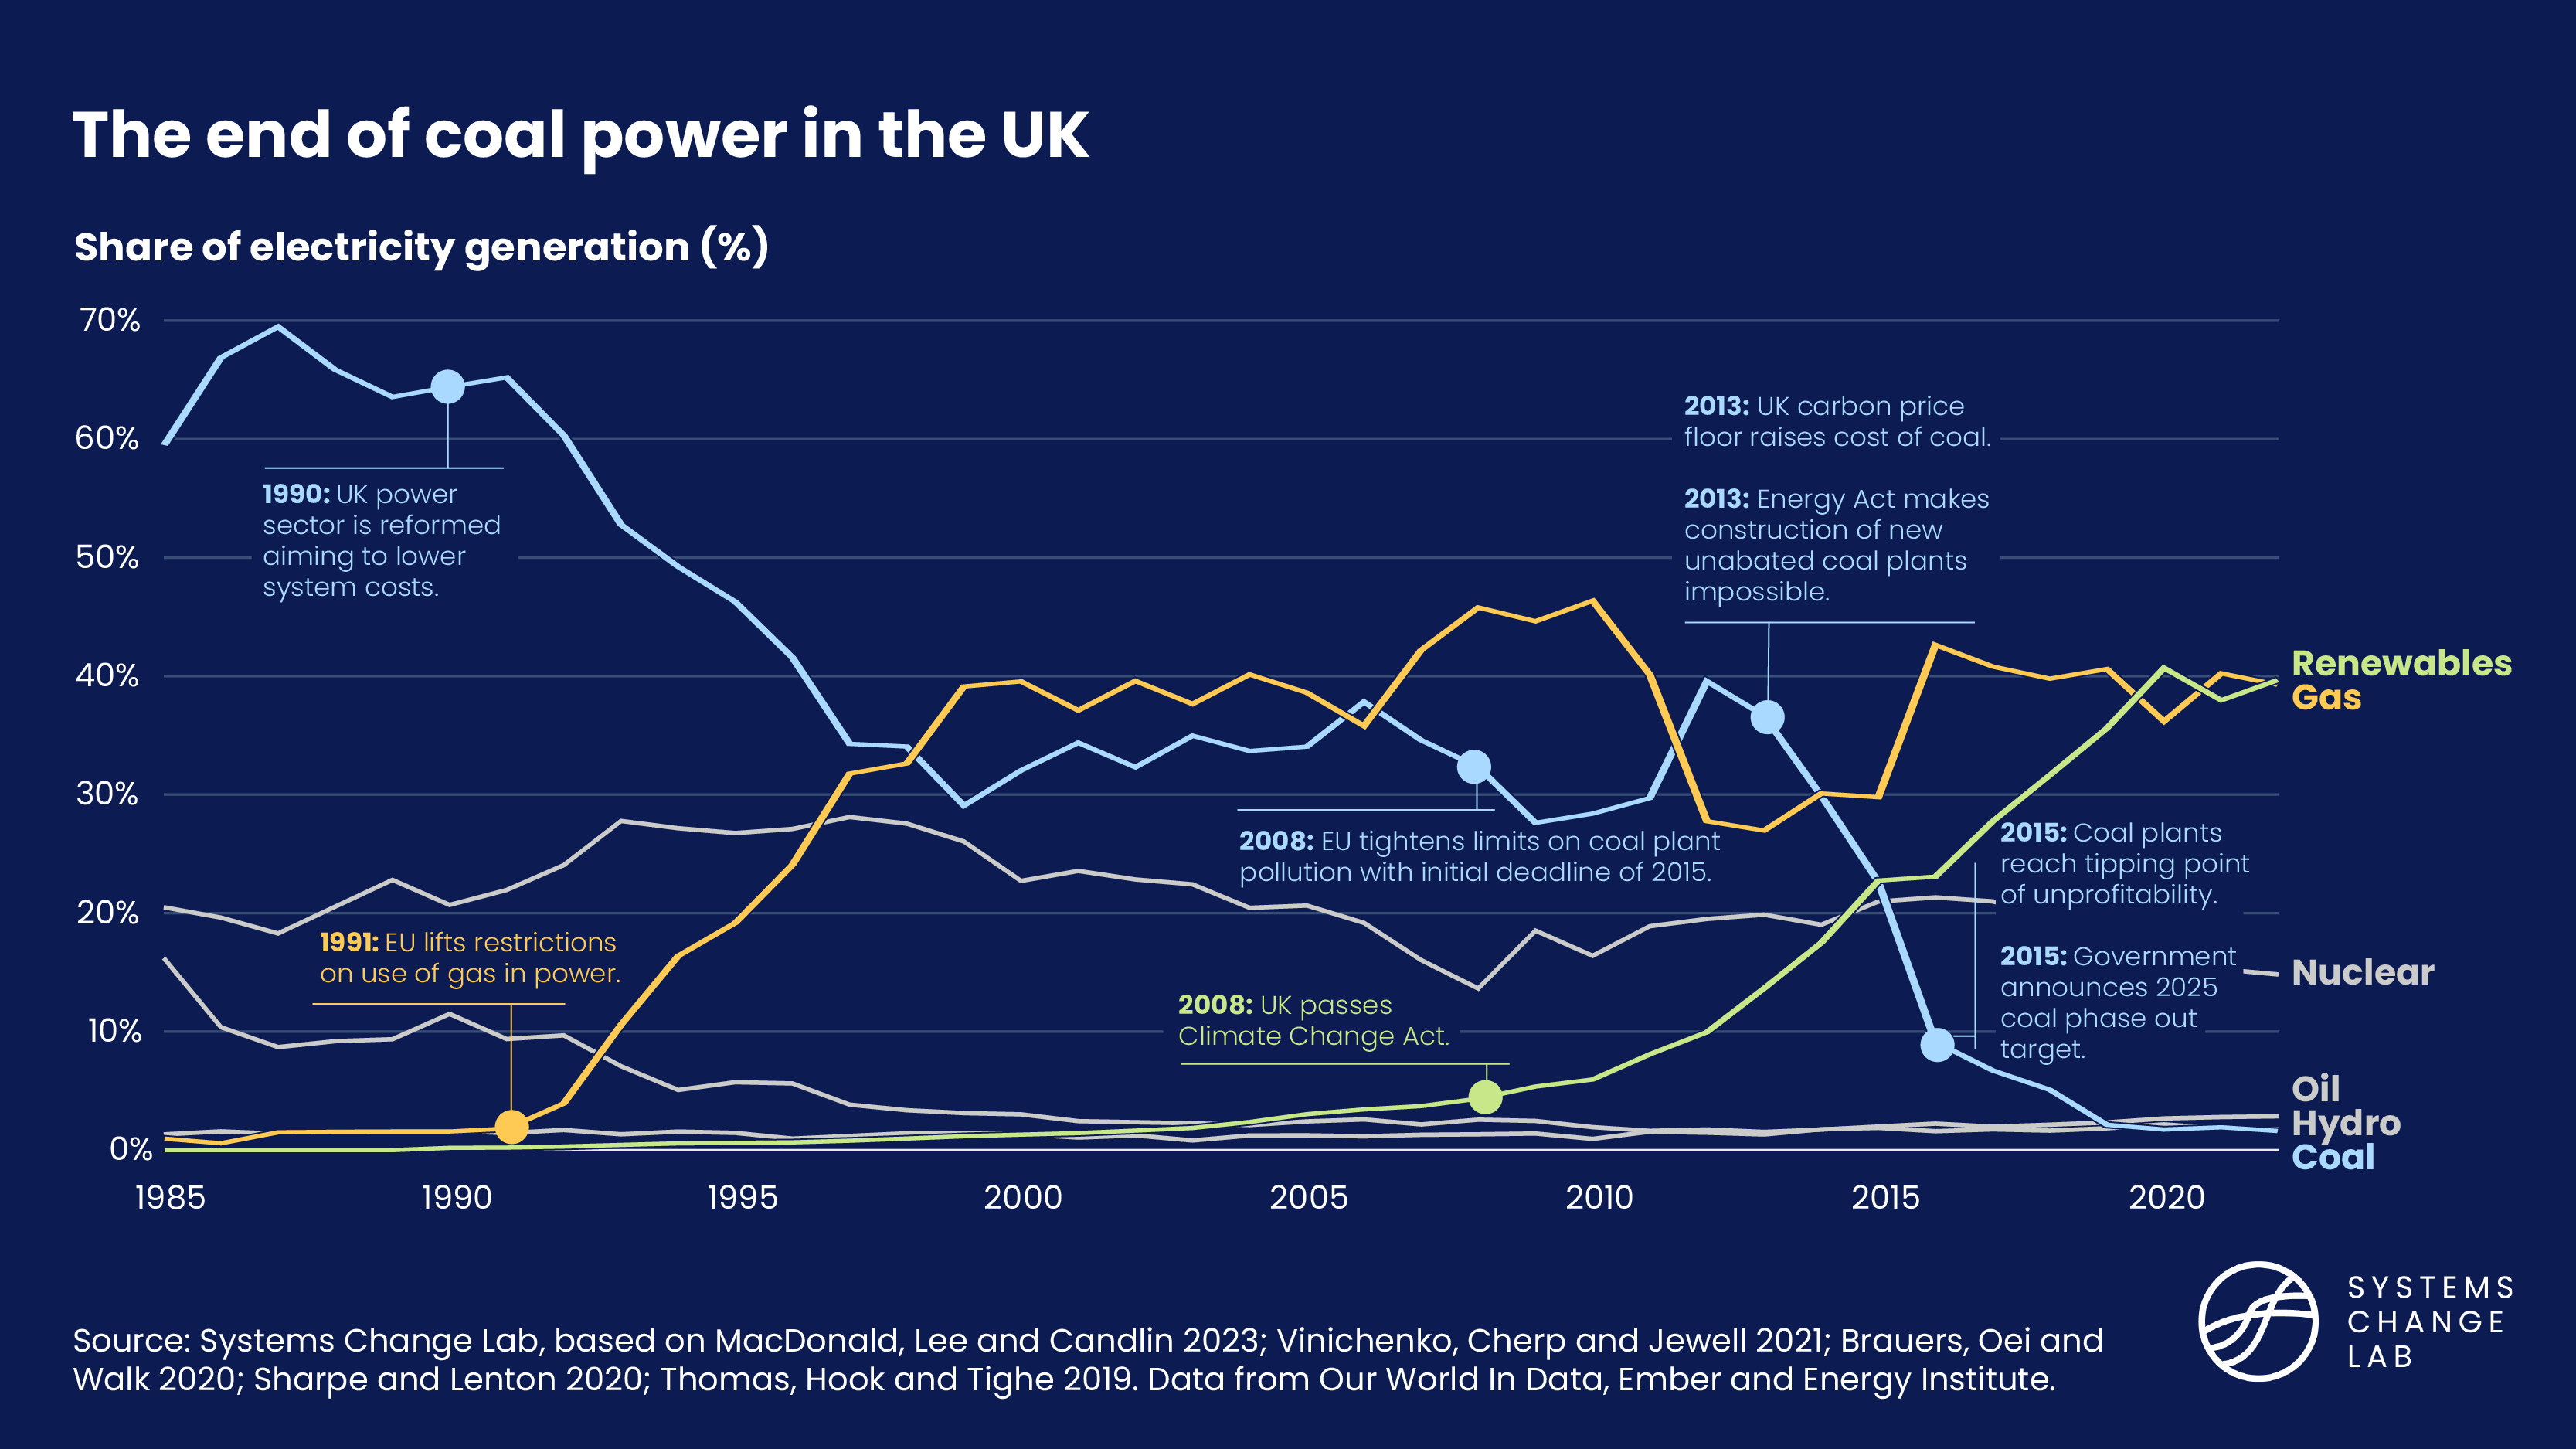 TImeline showing the end of coal power in the UK